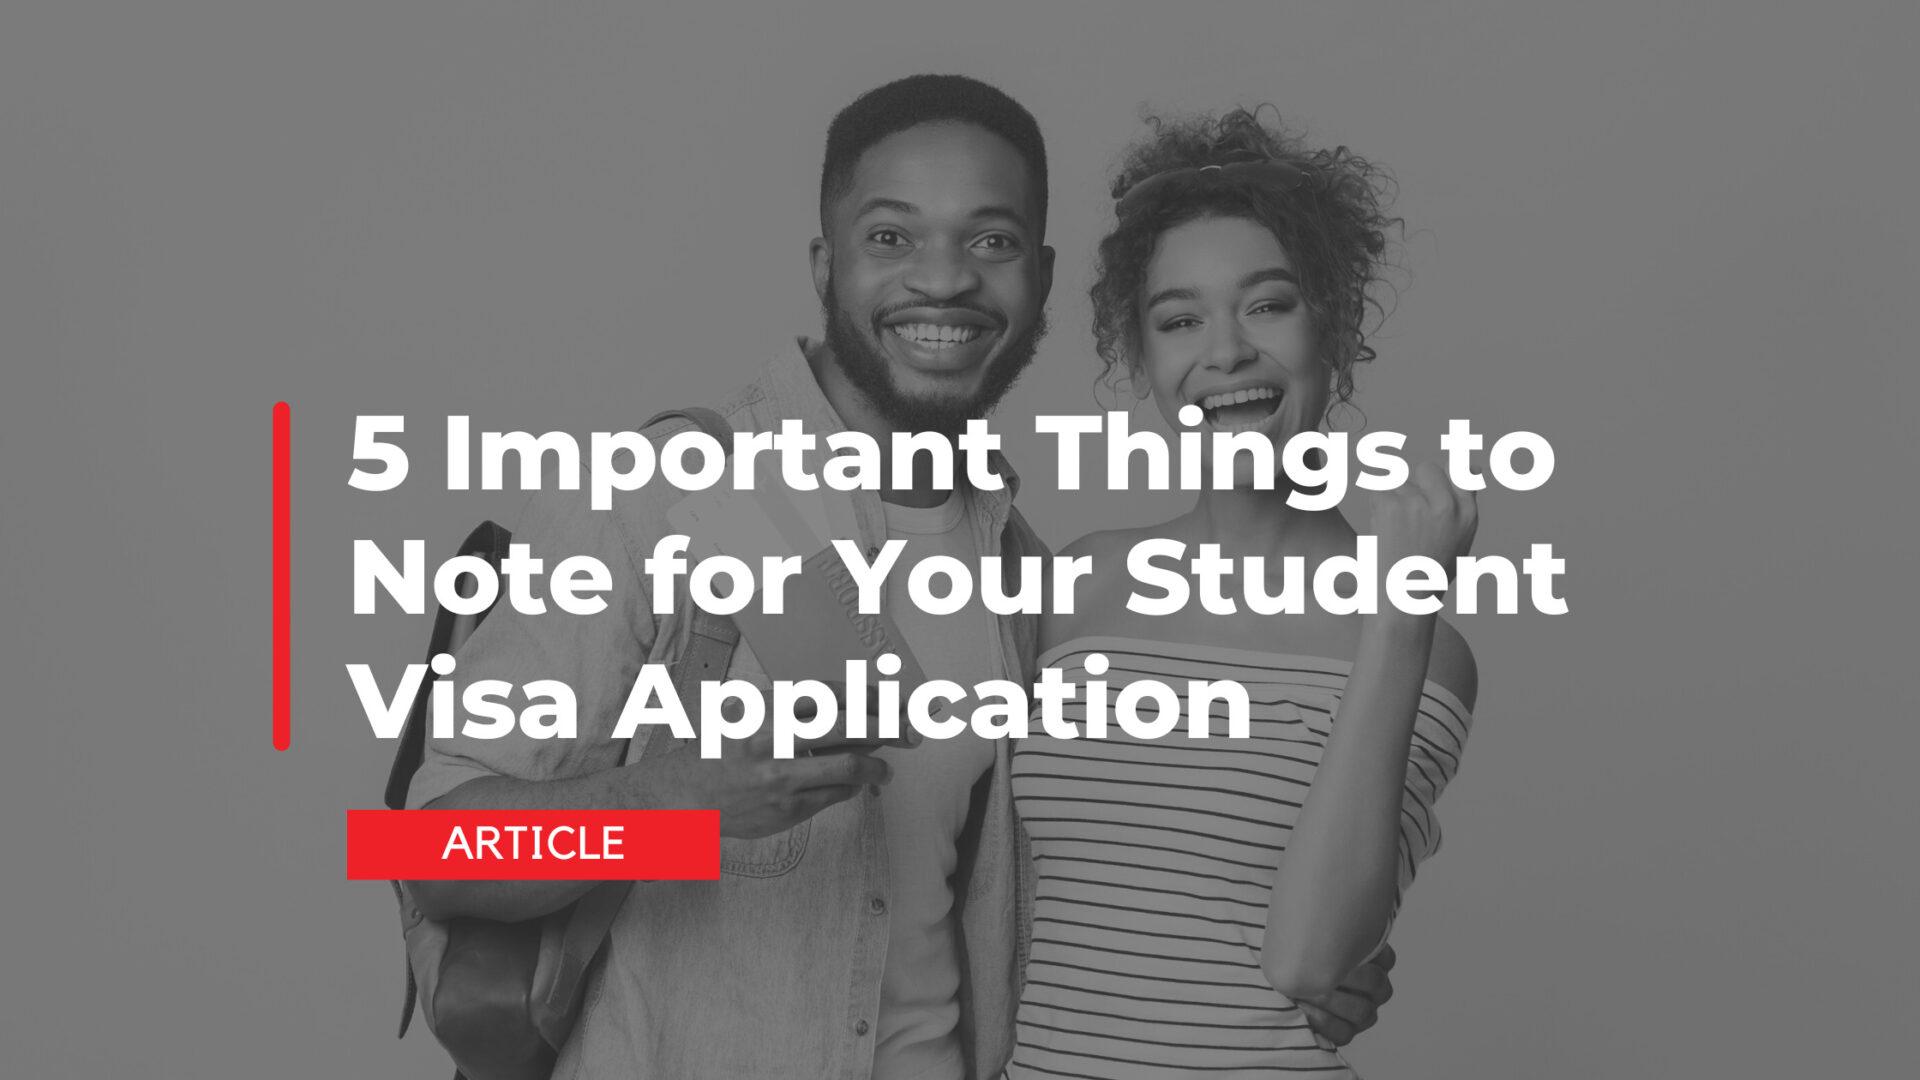 5 Important Things to Note for Your Student Visa Application